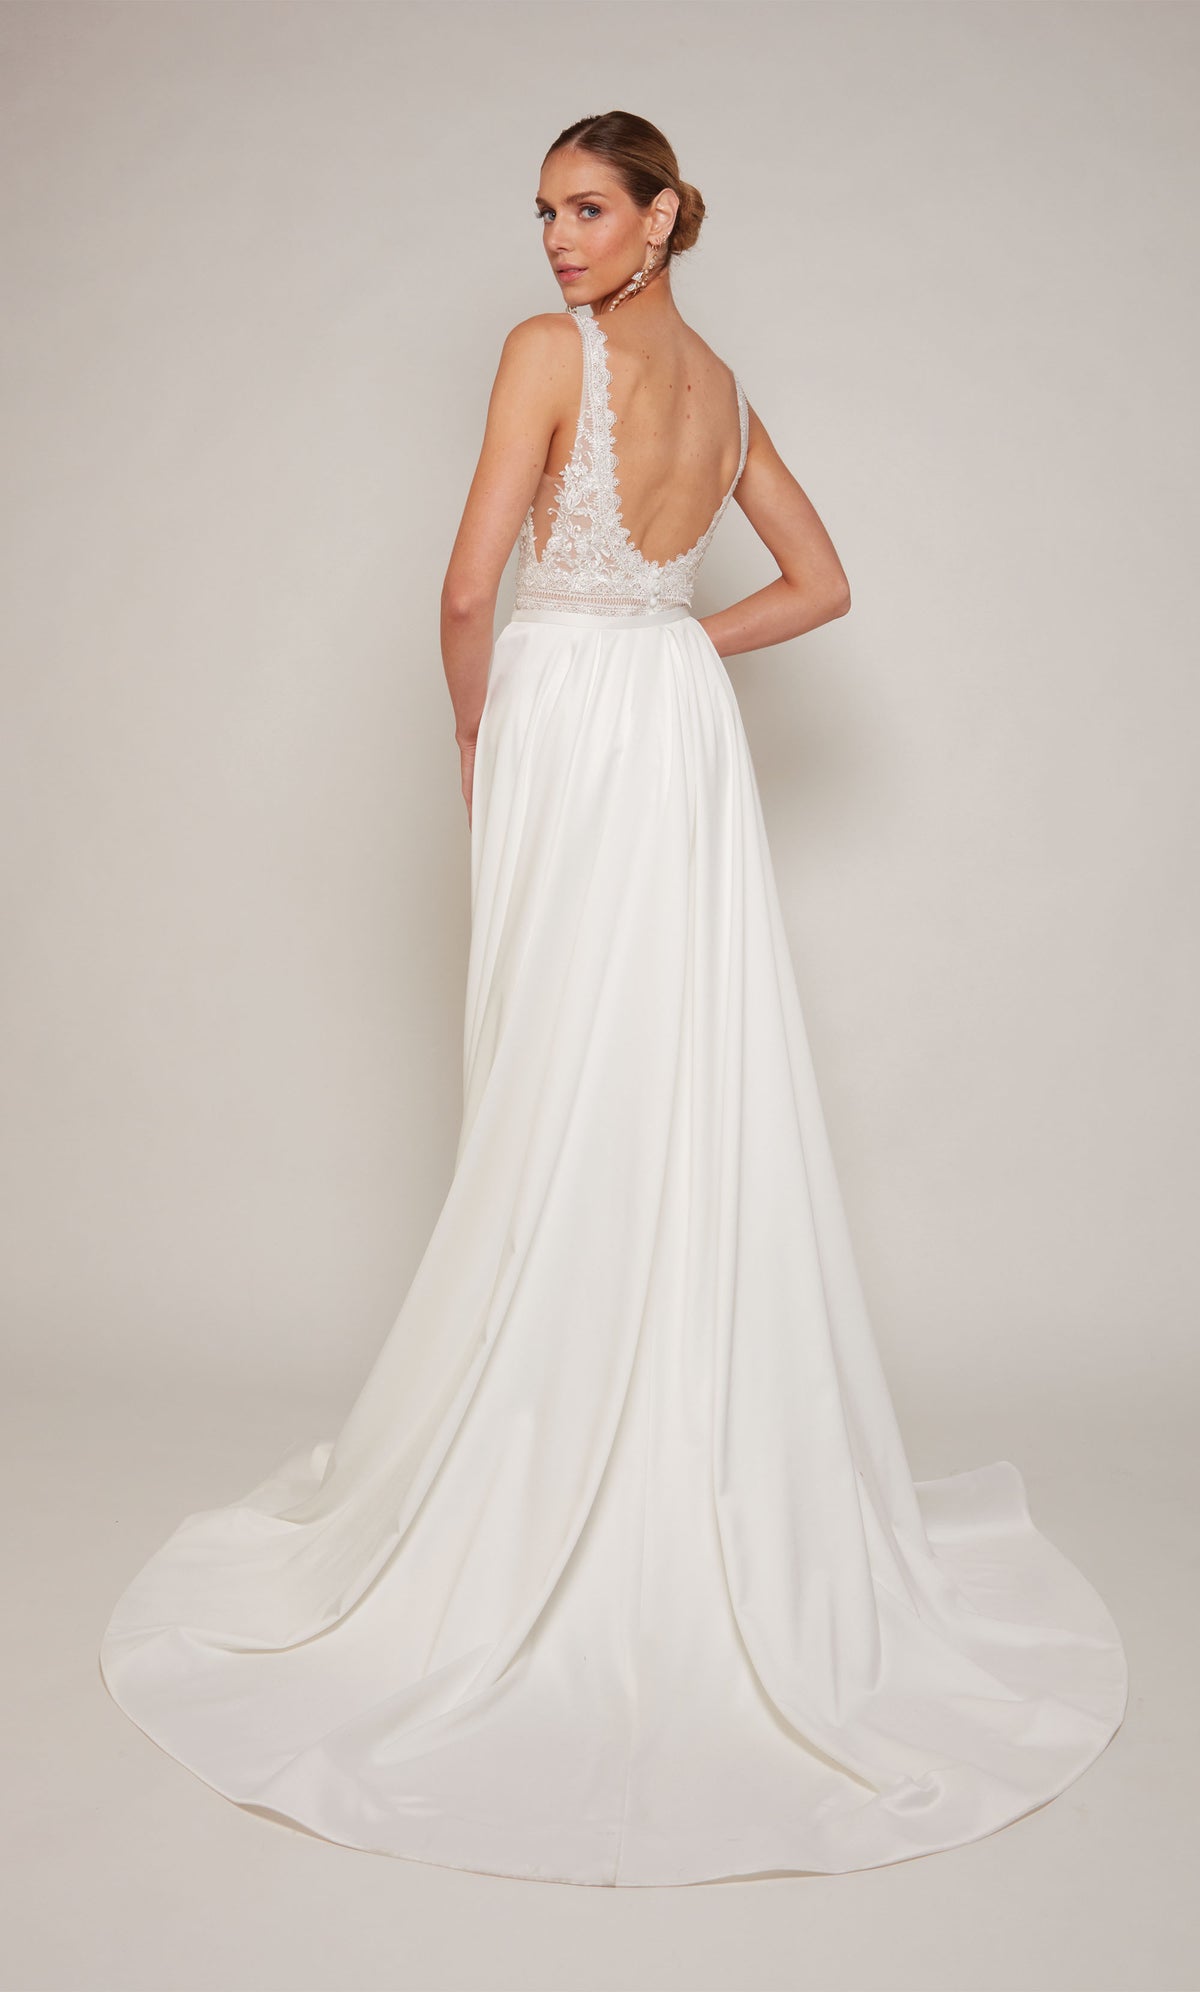 Luxurious satin sheath wedding dress in white, spotlighting an elegant U-shaped open back and delicate lace details. The dress comes with a detachable train that adds a hint of drama and formality during the ceremony, and can be detached for a more understated reception style.